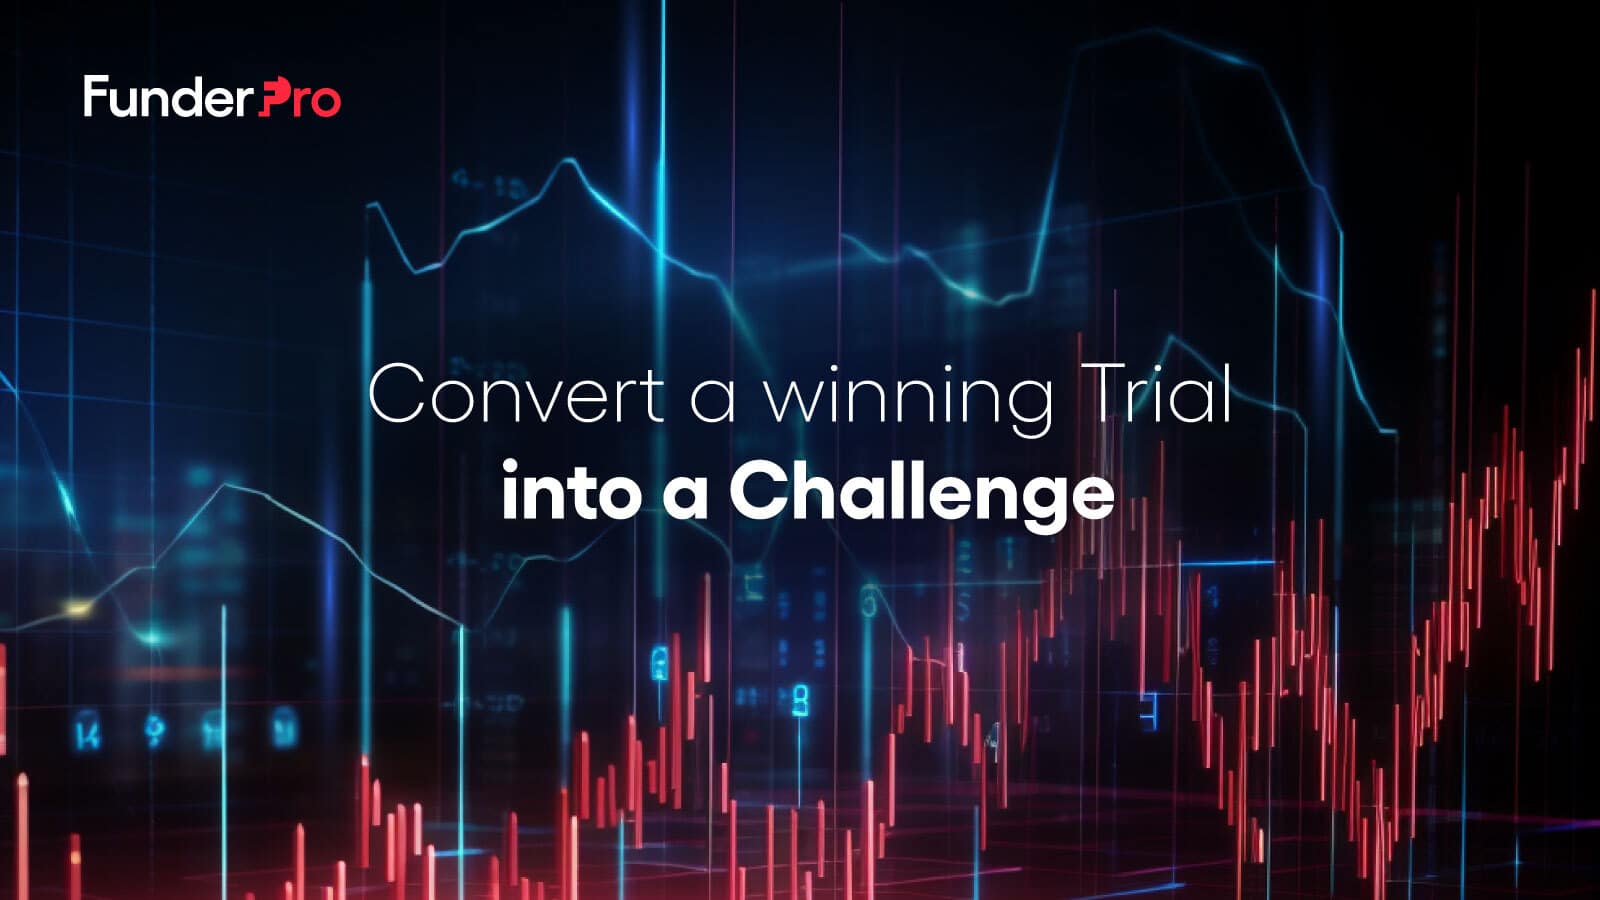 Convert your winning Free Trial Account into a Funded Account Challenge with FunderPro. Carry over profits and enjoy extra perks!